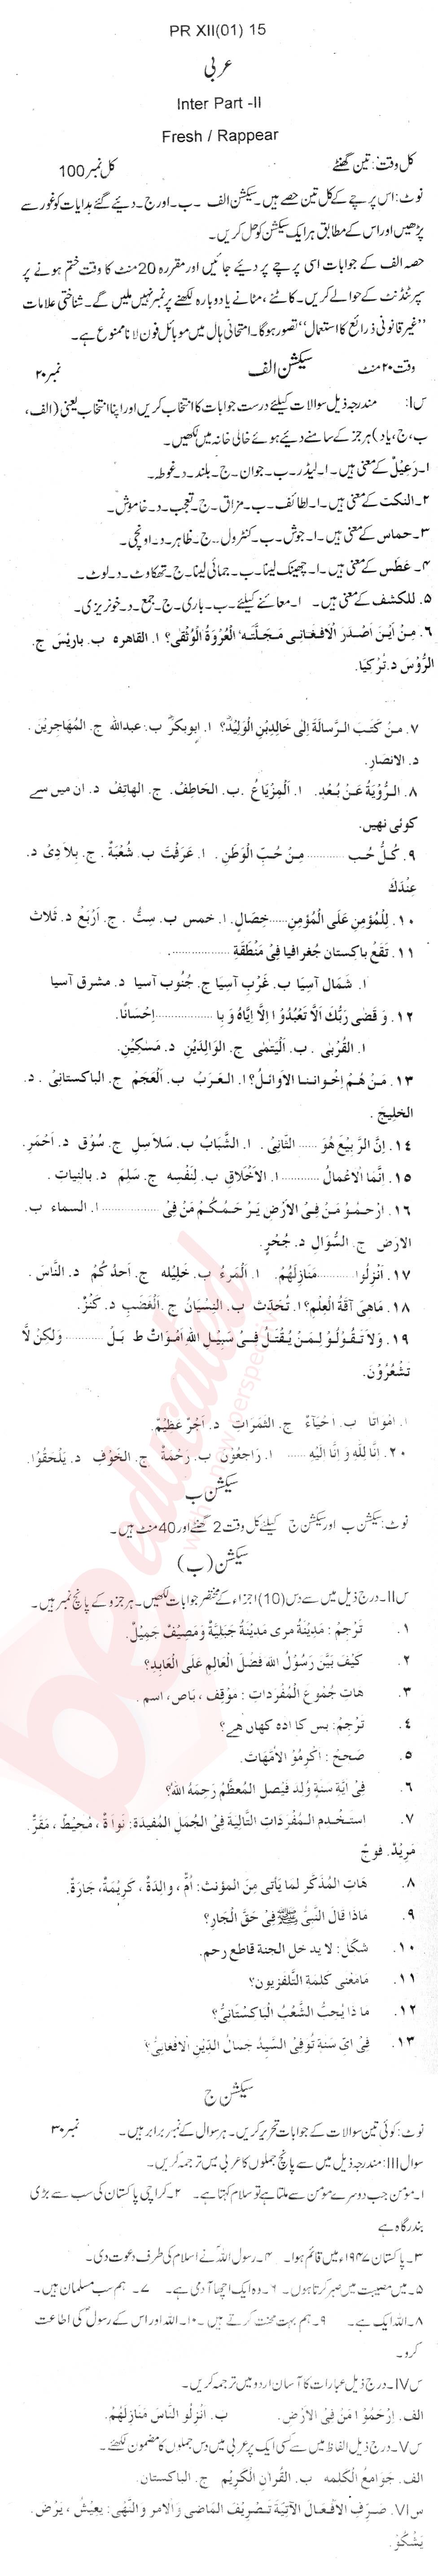 Arabic FA Part 2 Past Paper Group 1 BISE Abbottabad 2015